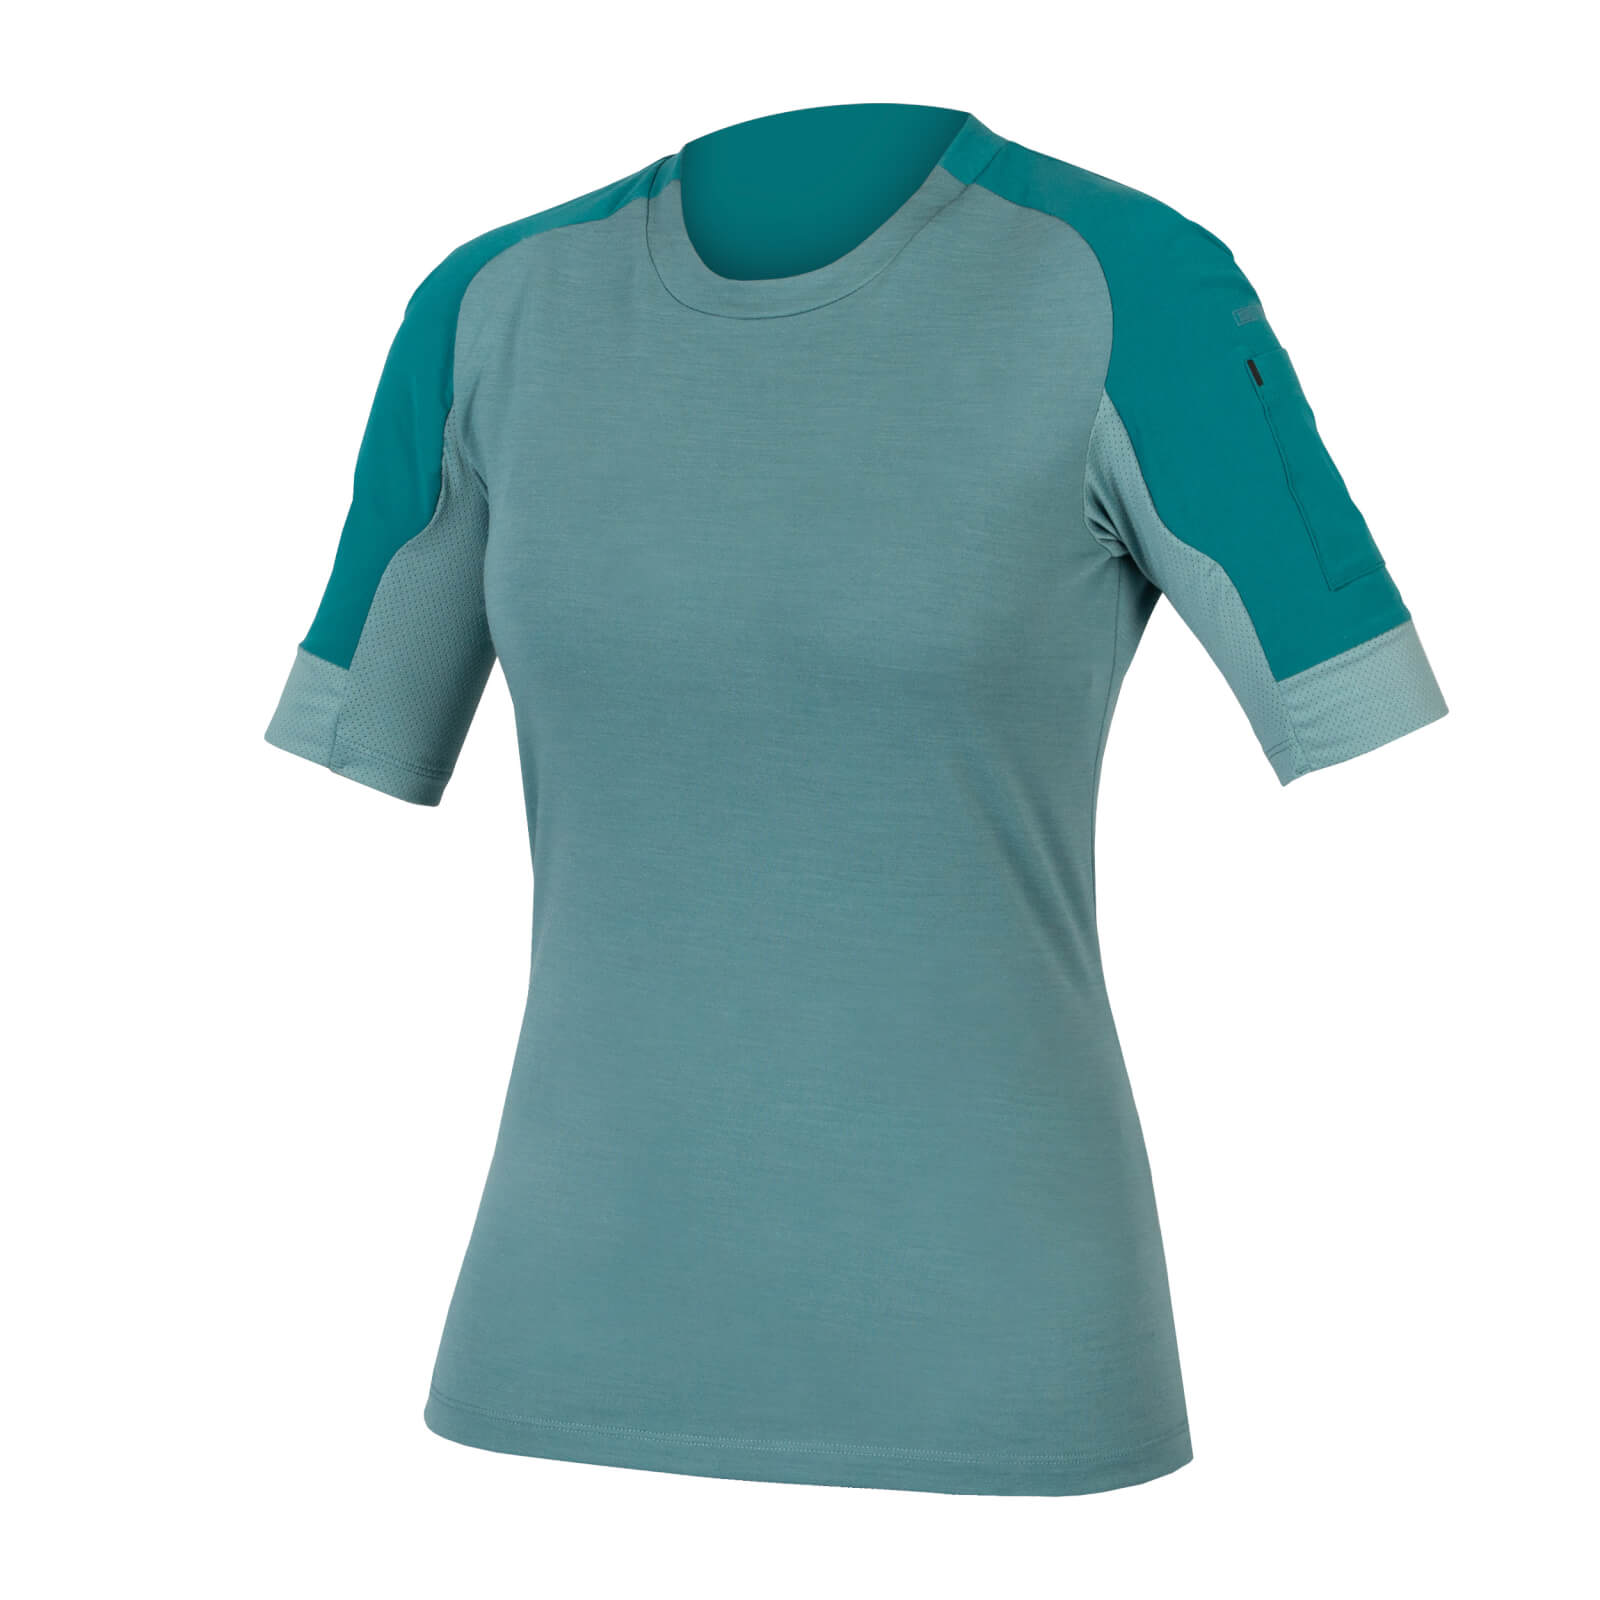 Womens Gv500 S/s Jersey - Spruce Green